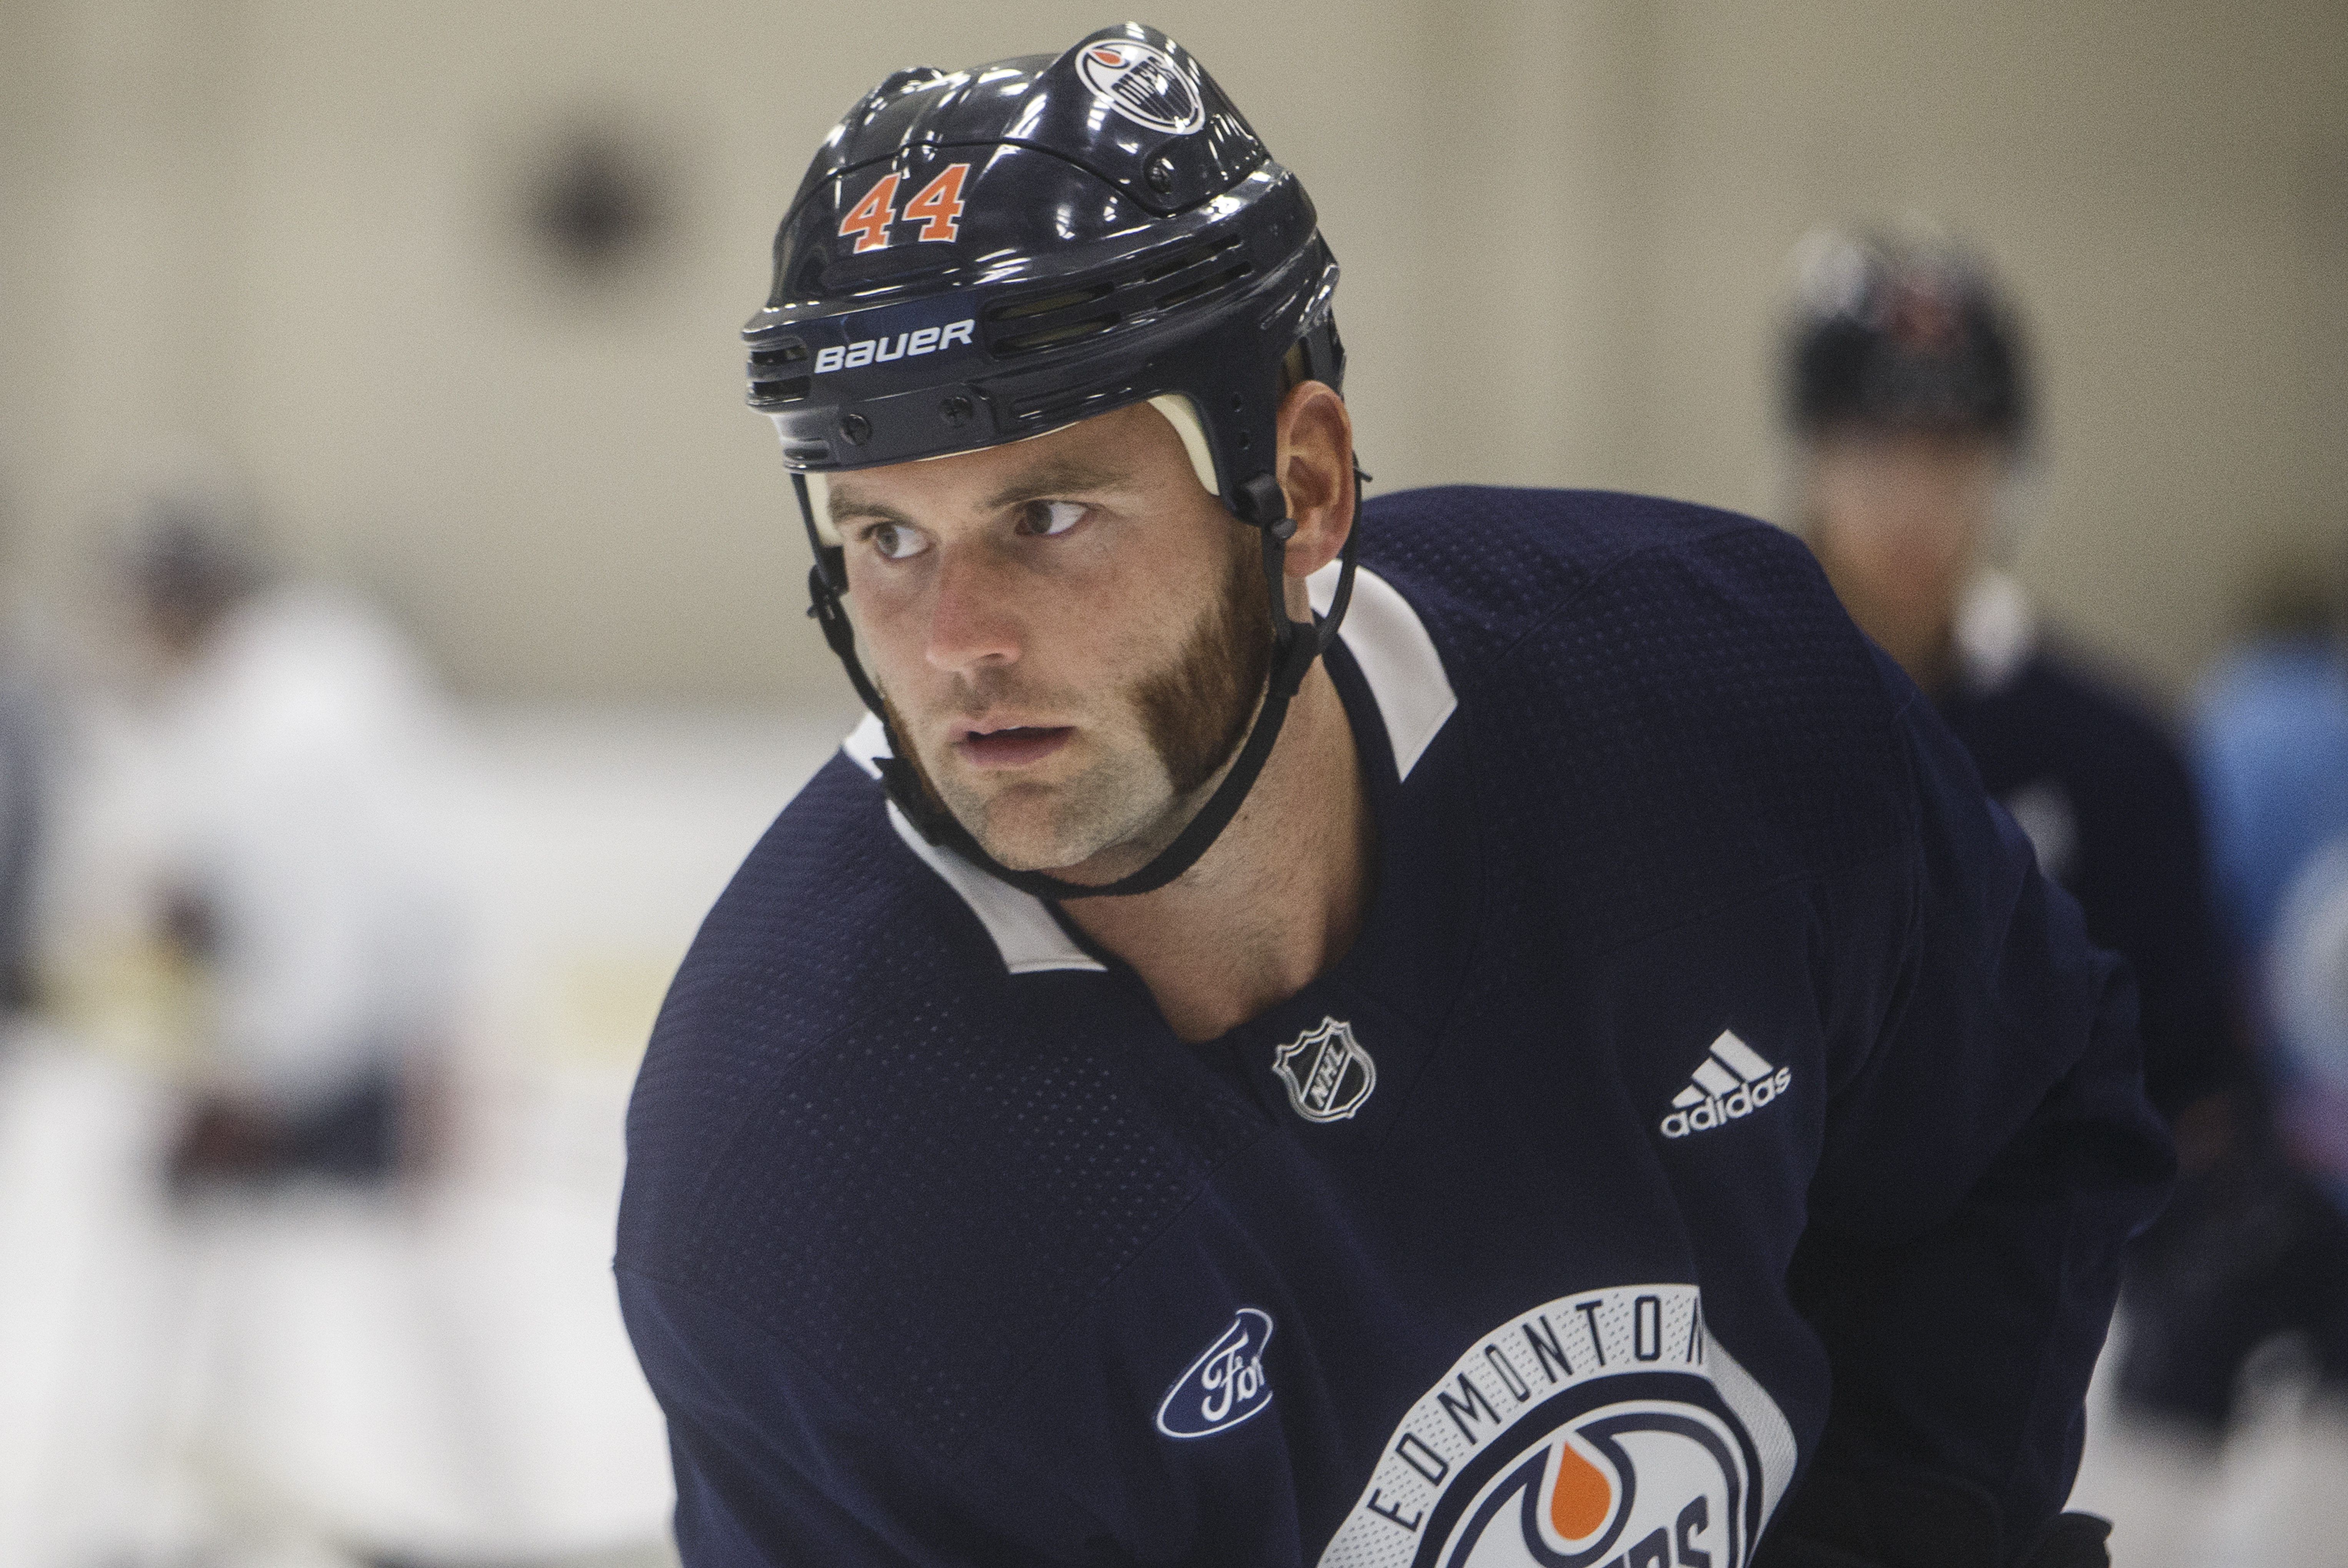 Oilers Kassian Has to Play on the Edge, but not Beyond